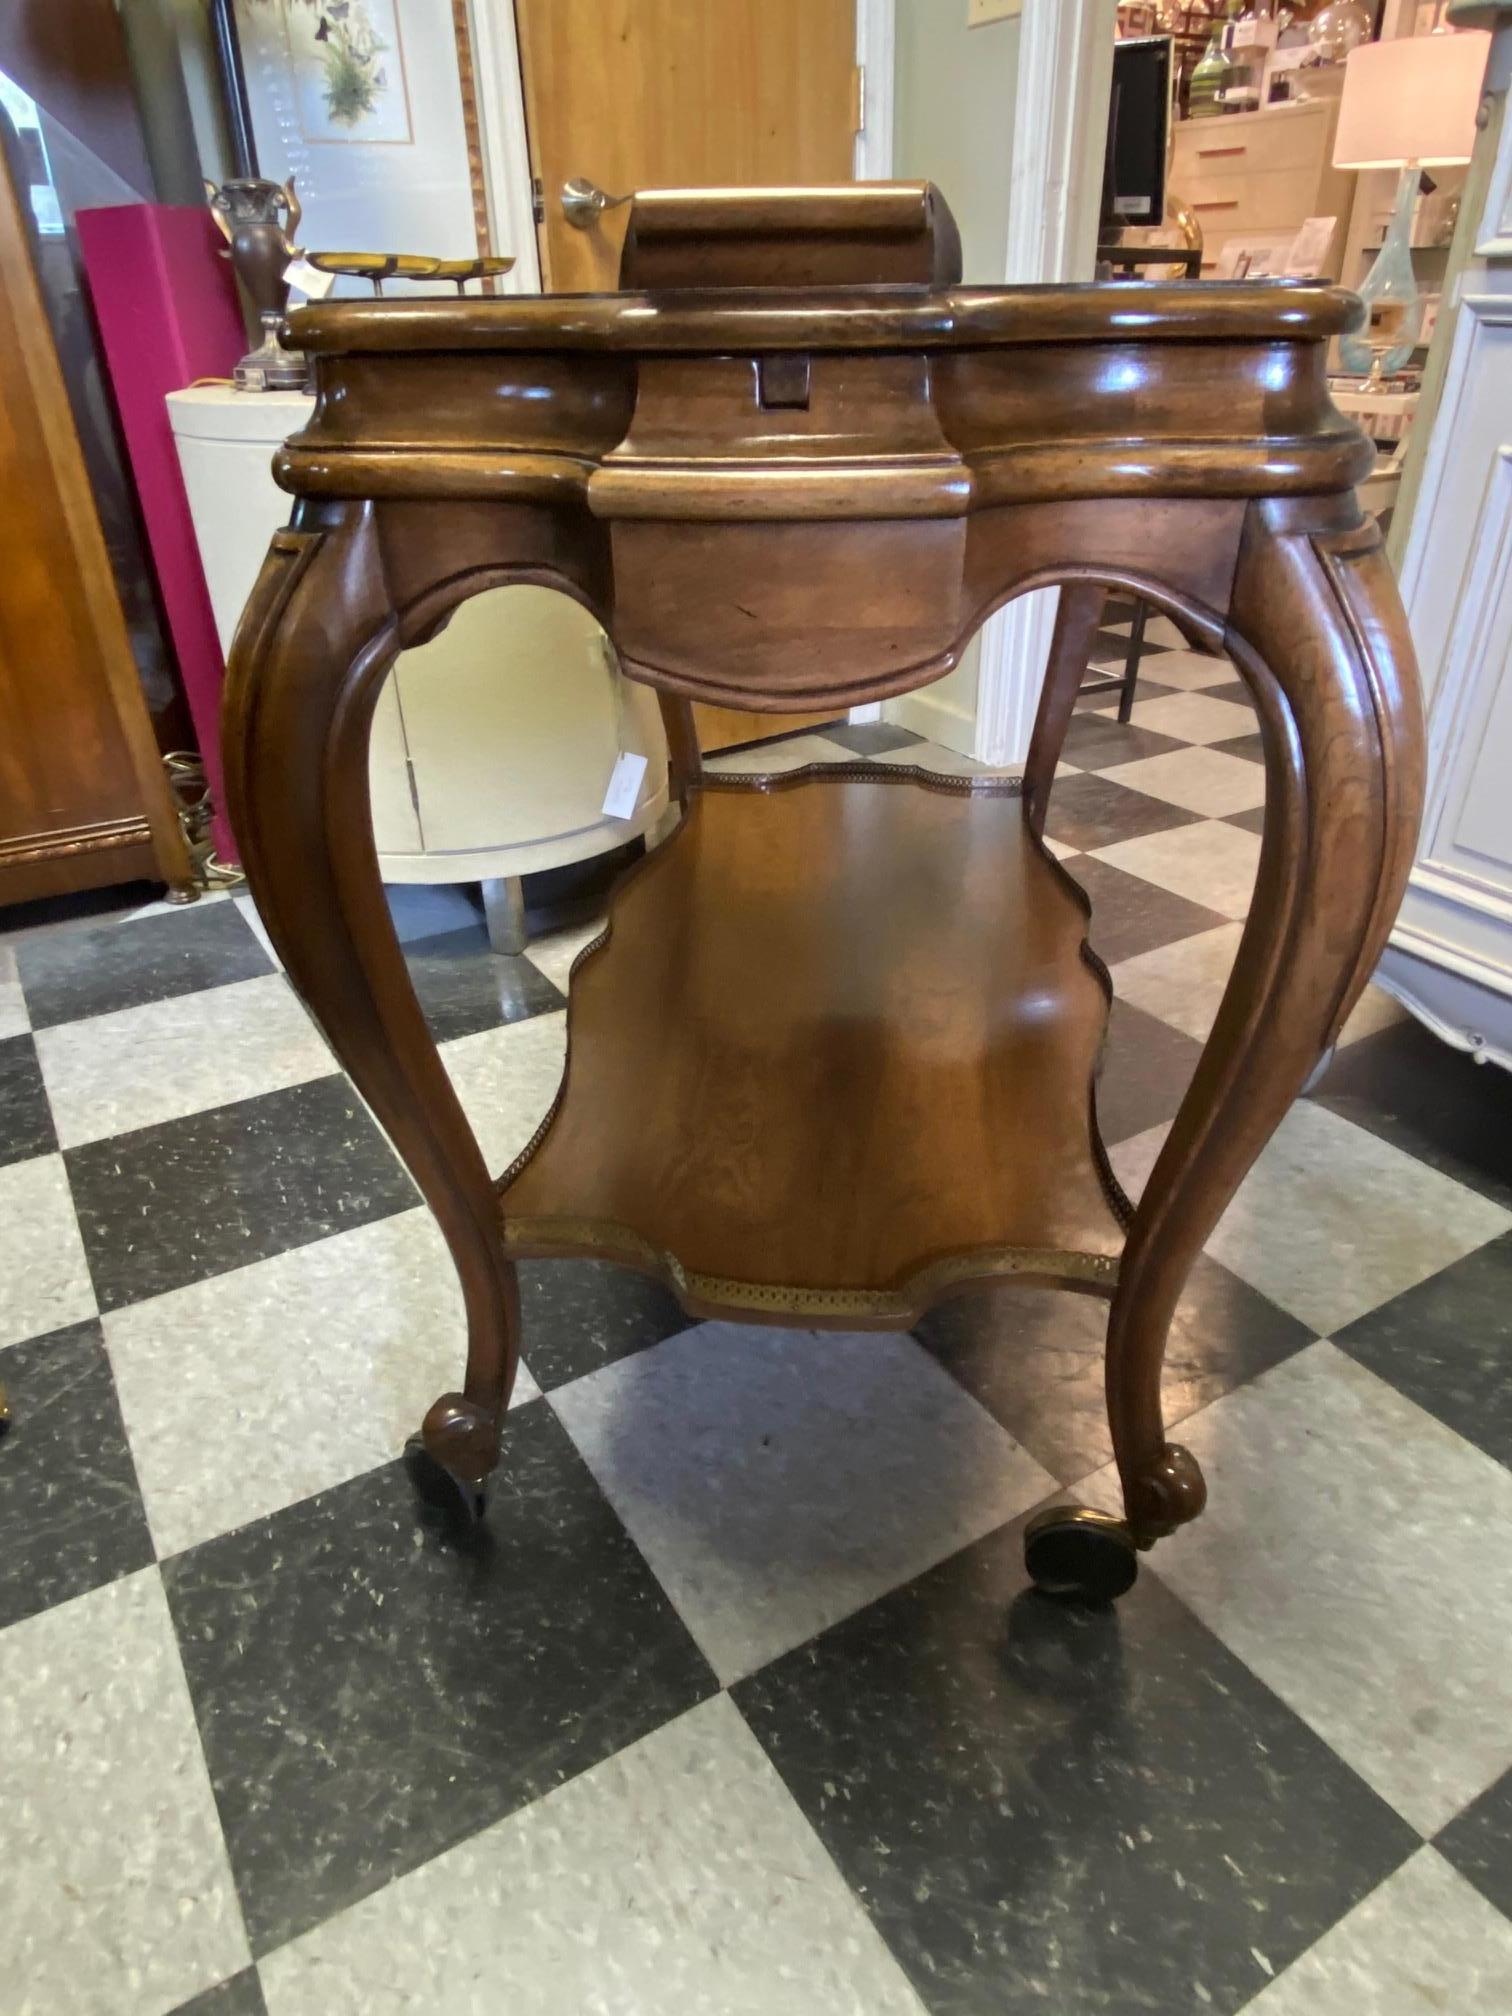 Interesting solid wood bar cart with a brass gallery around the perimeter of the bottom shelf. Curved legs with graceful lines this cart can blend into any decor. The top slides open to reveal a black surface which is water proof and perfect for